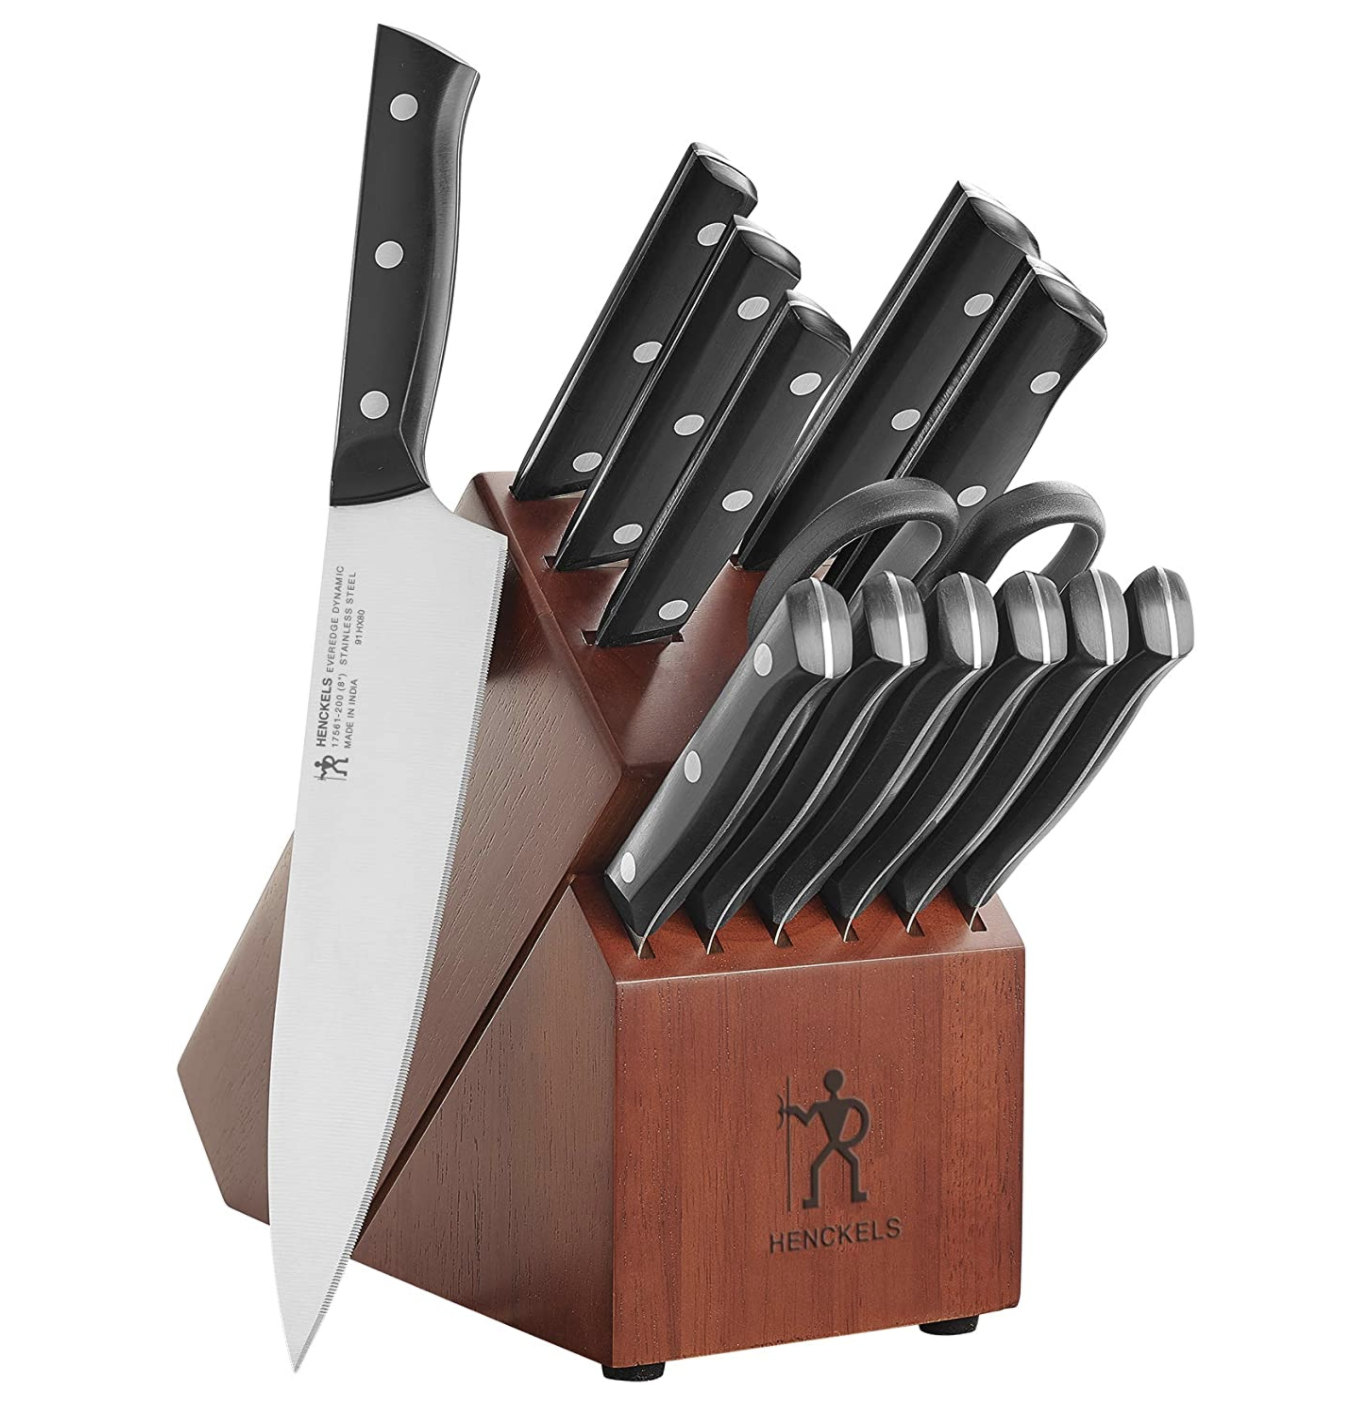 The full set of knives on a blank background